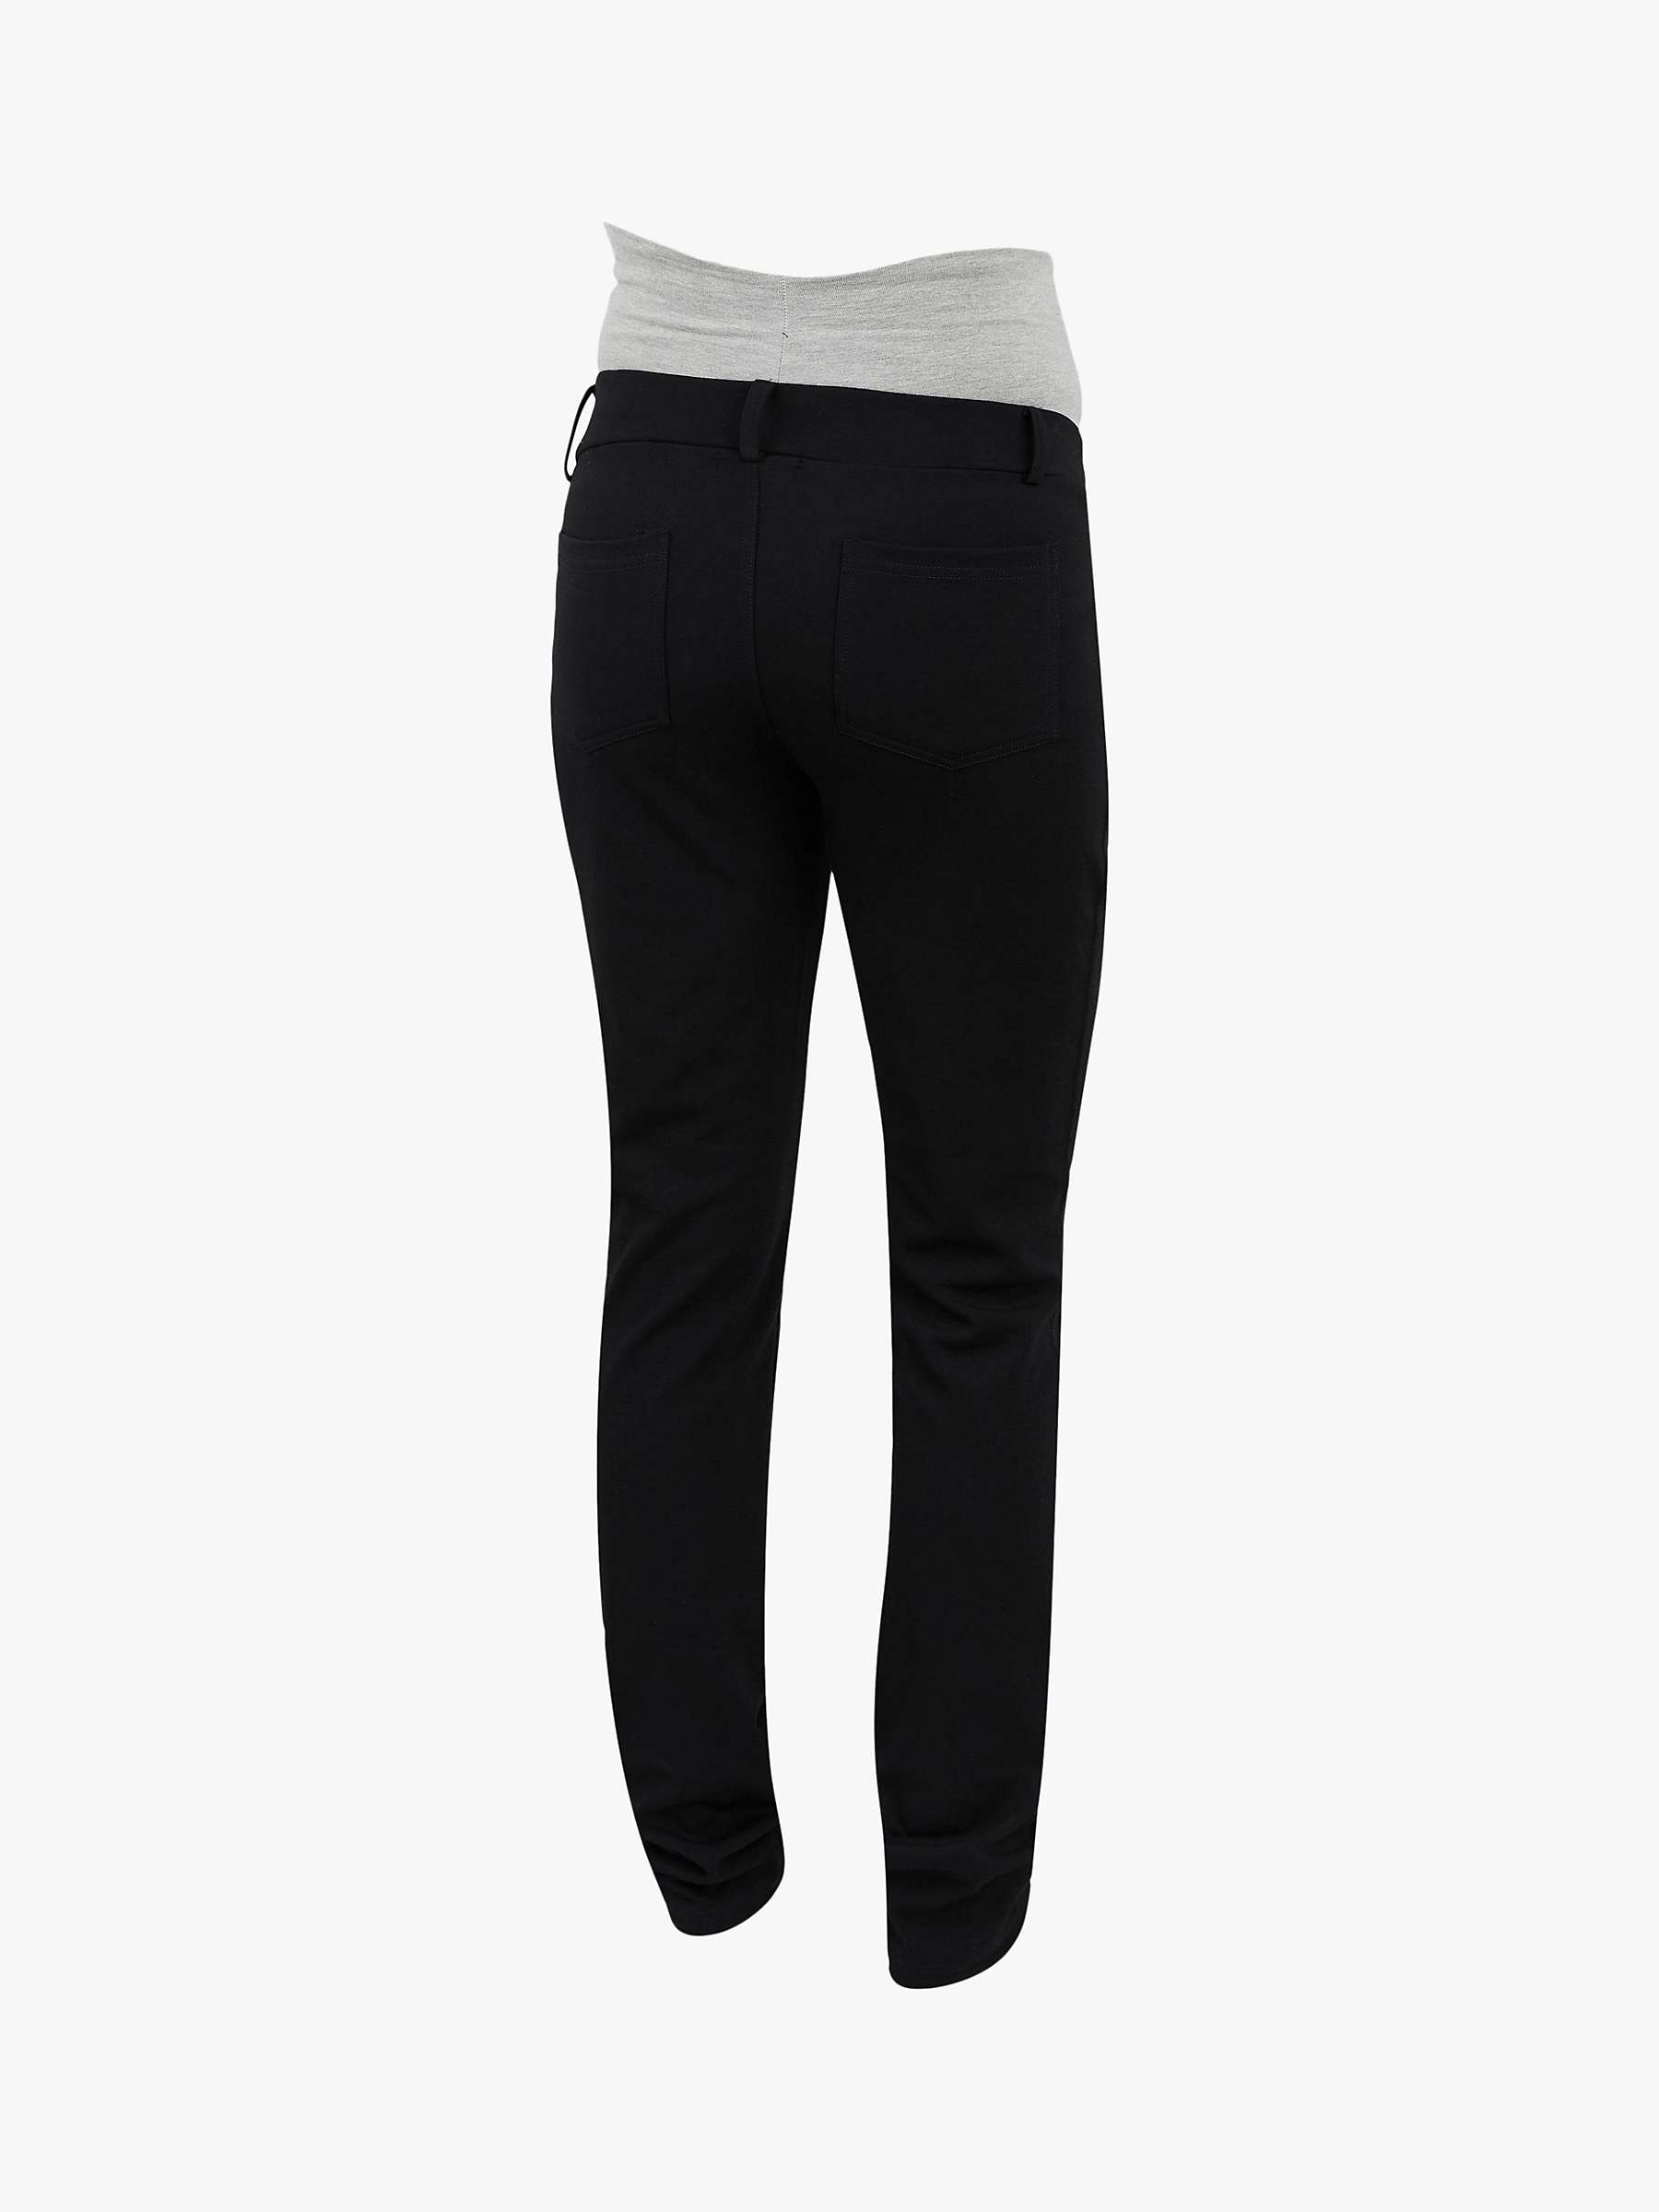 Buy Mamalicious Alba Jersey Maternity Trousers, Black Online at johnlewis.com